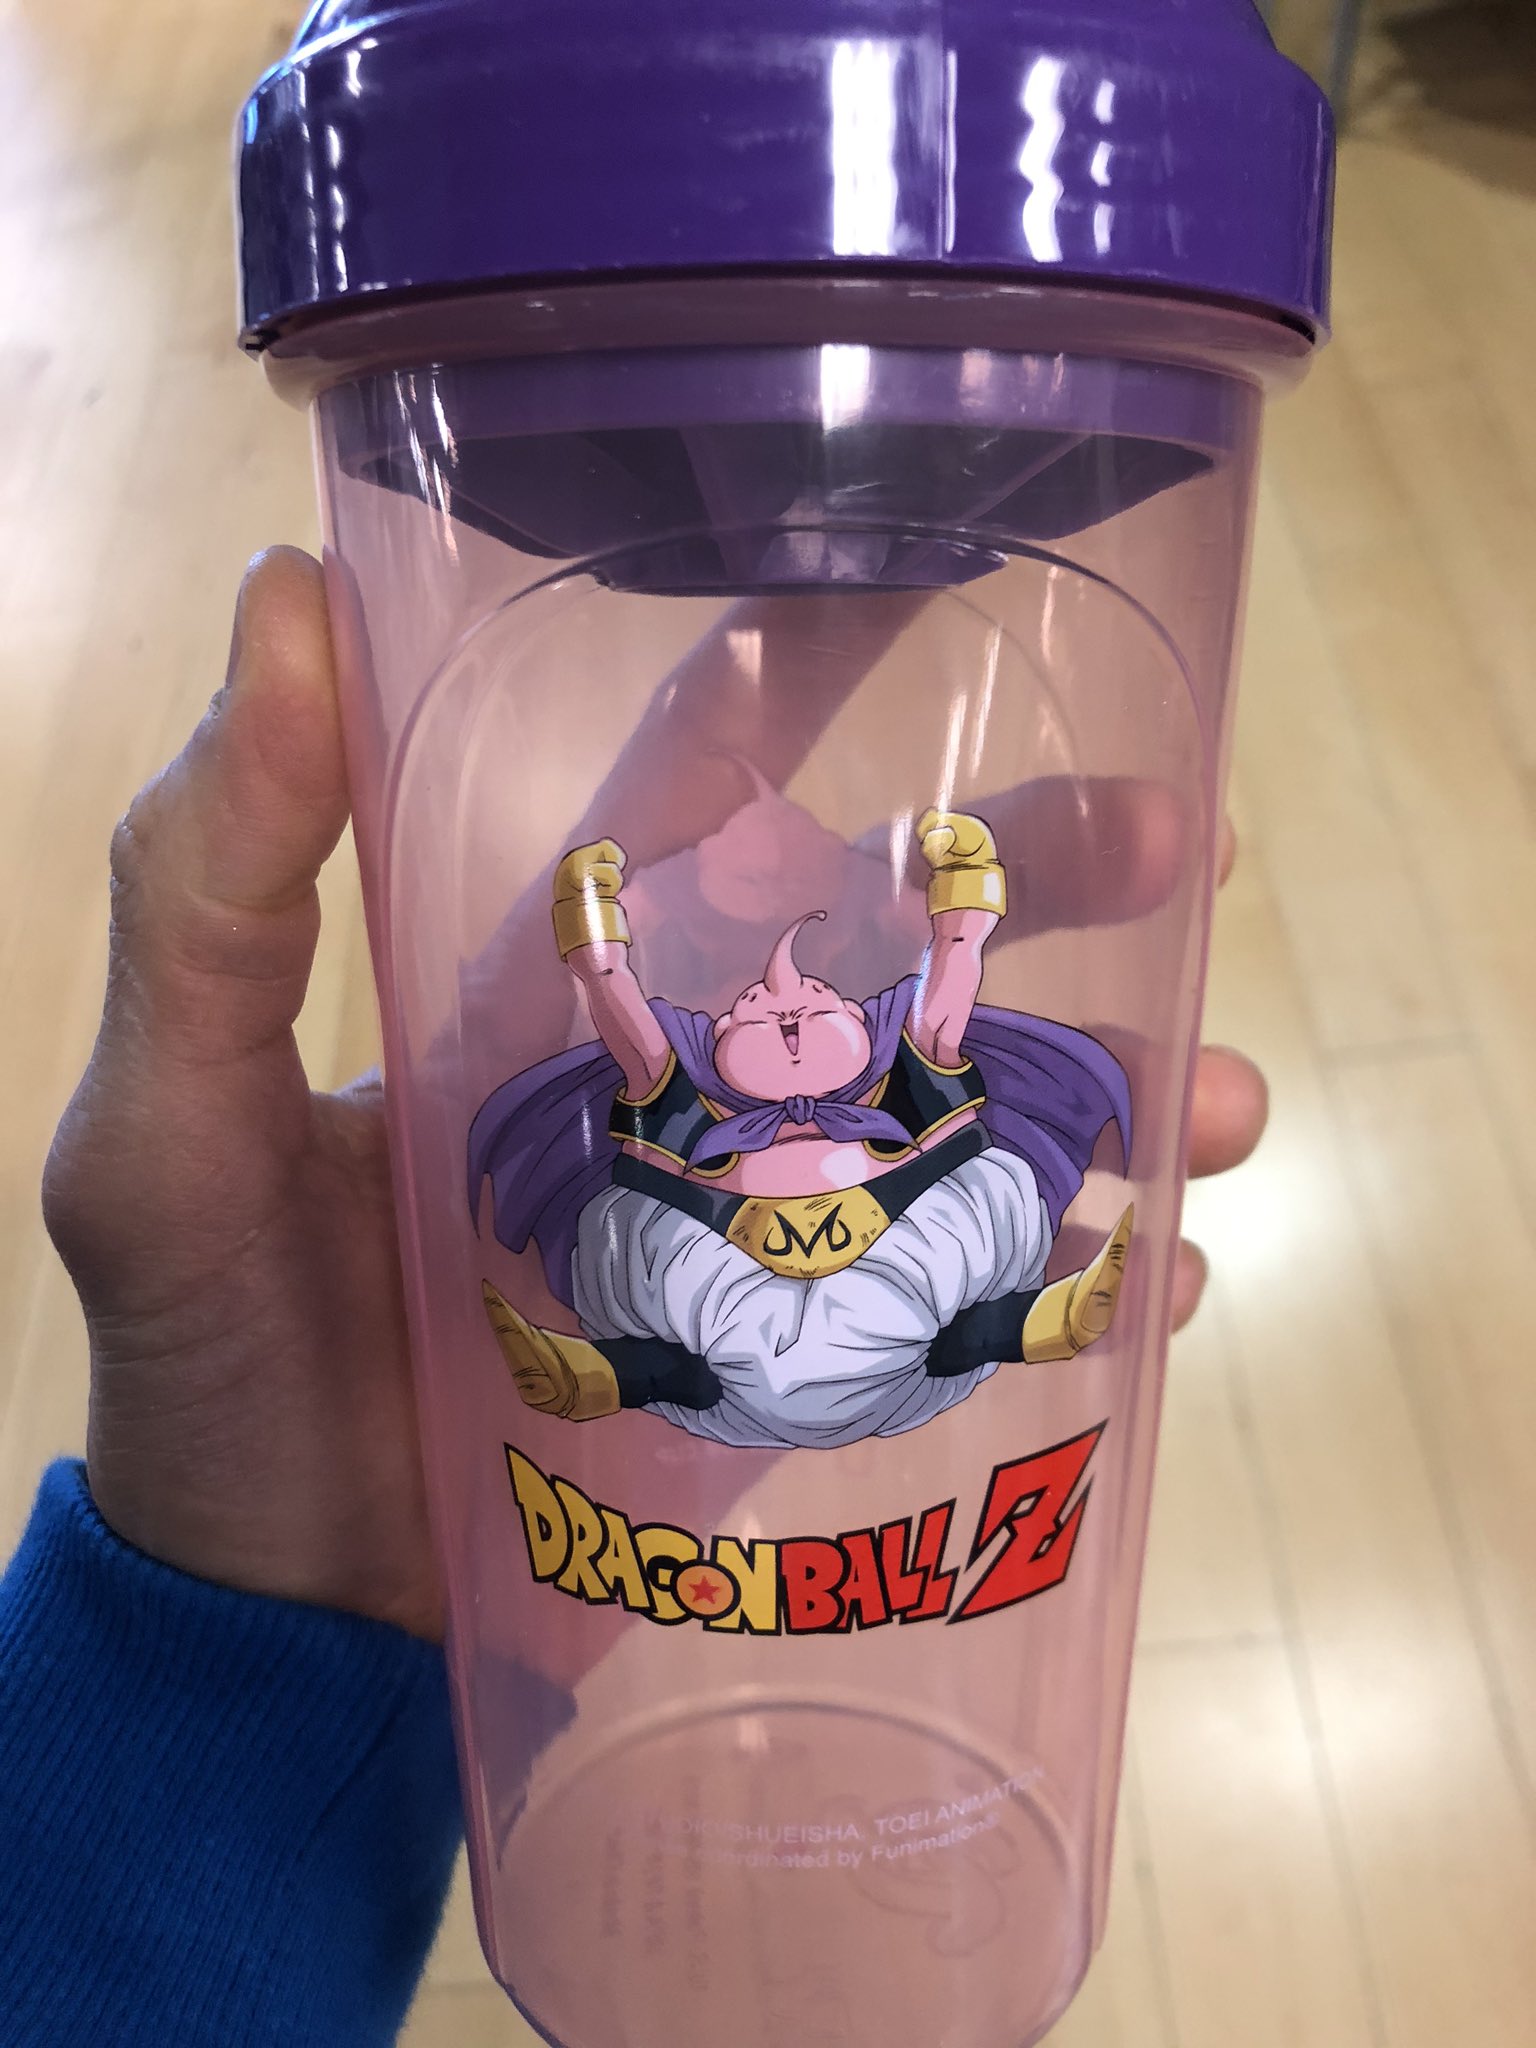 Roxanne Modafferi on X: Check out this tall Boo shaker cup from  @Collector_Cup !! Use code “ROXY” for a discount on   #collectorcup #dbz #dragonballz #goku #vegeta #broly #otaku #anime   /